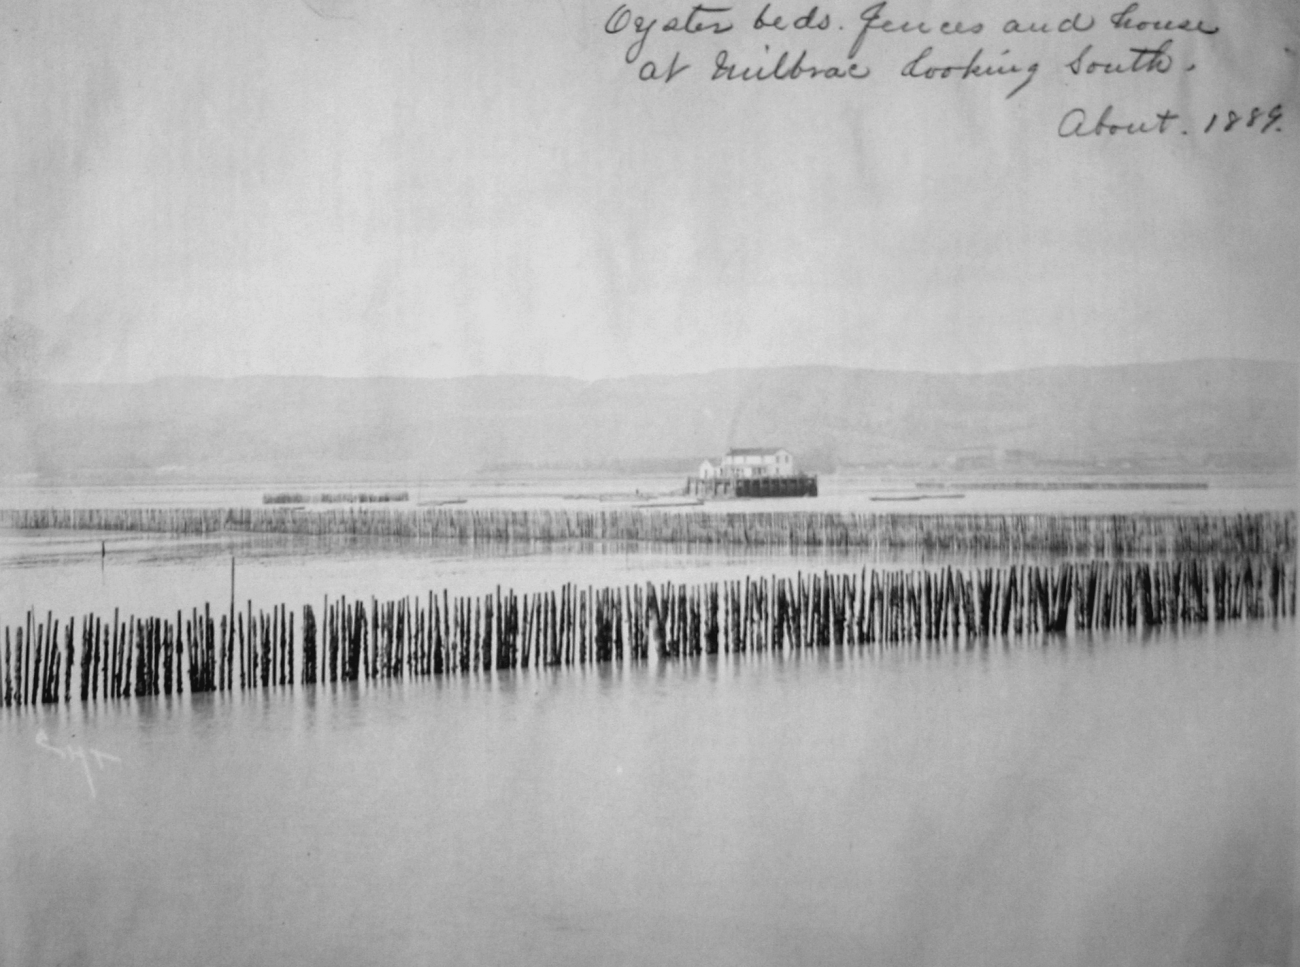 Oyster beds, fences and house at Milbrae, CA, looking south, about 1888